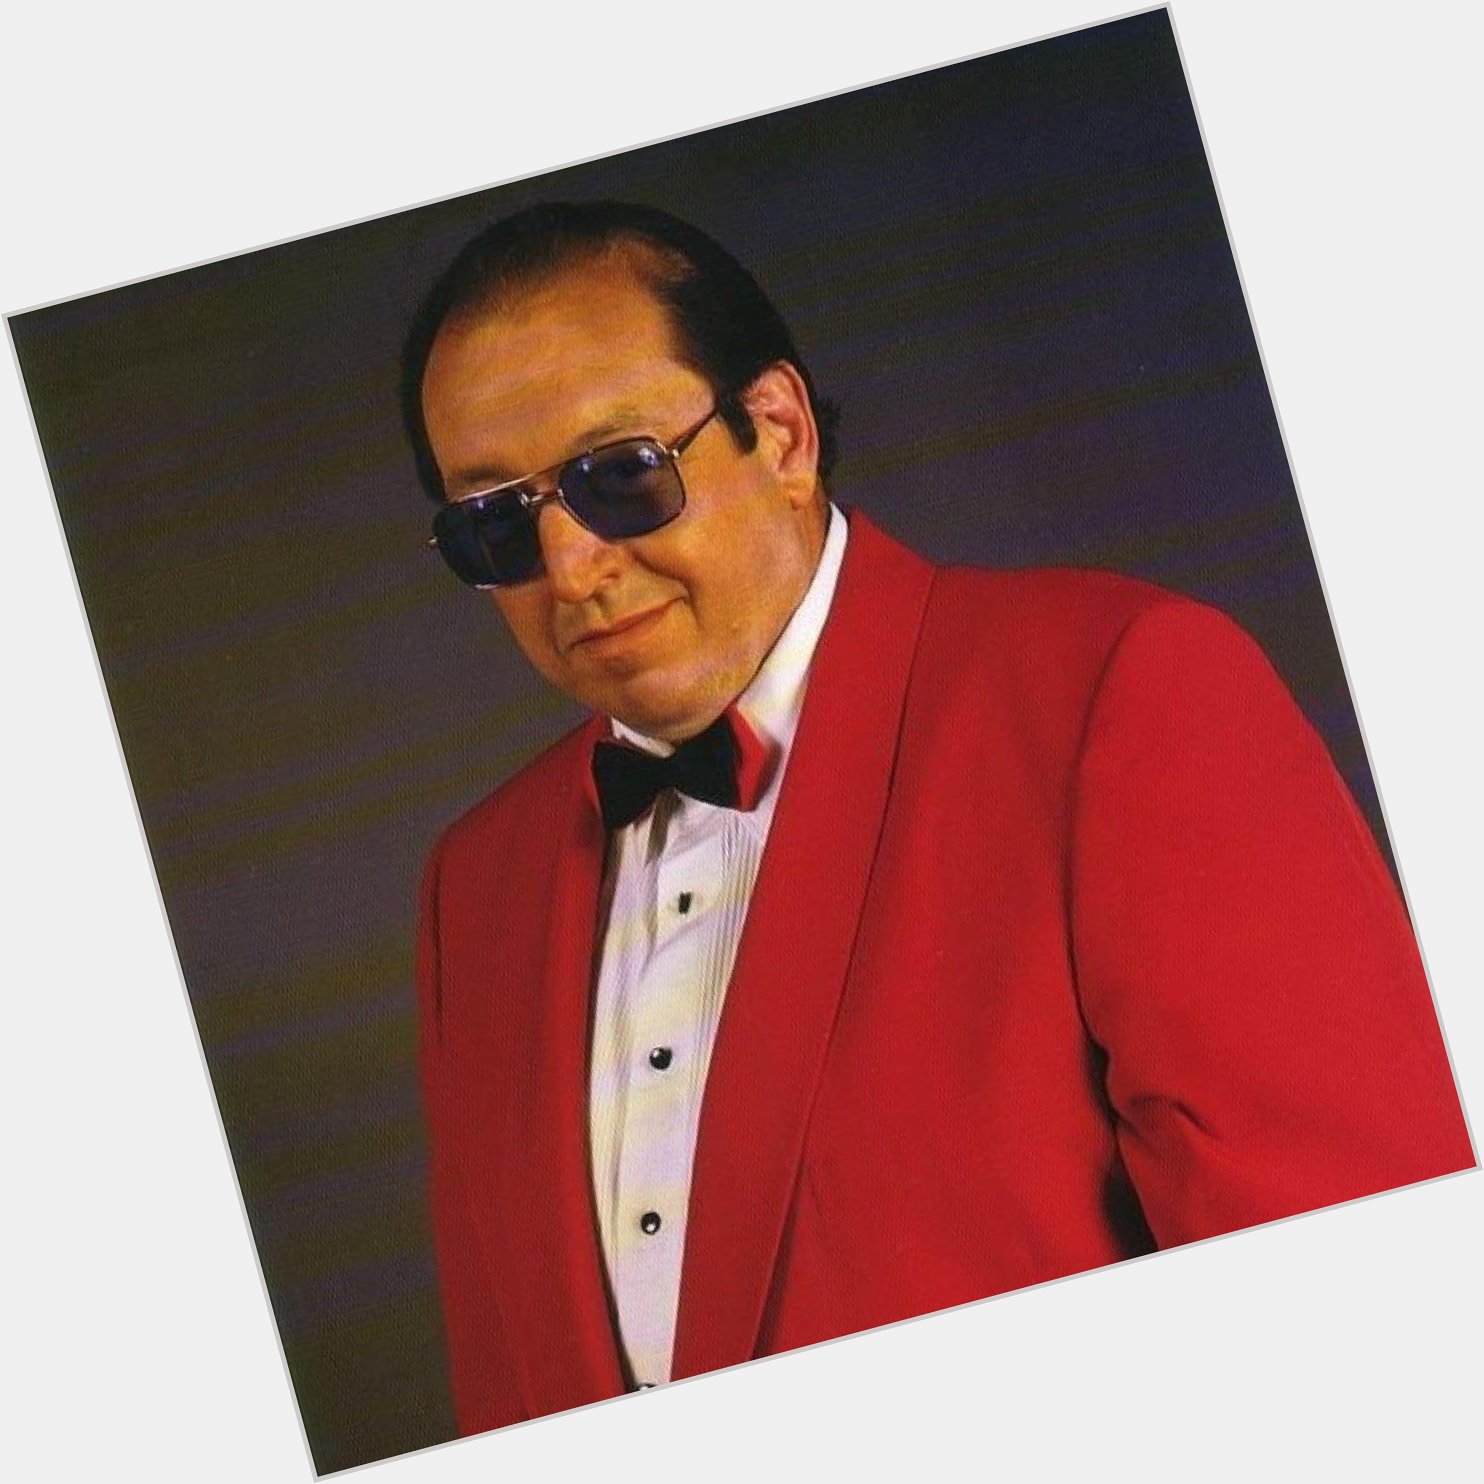 Happy Birthday to Gorilla Monsoon, who would have turned 78 today! 